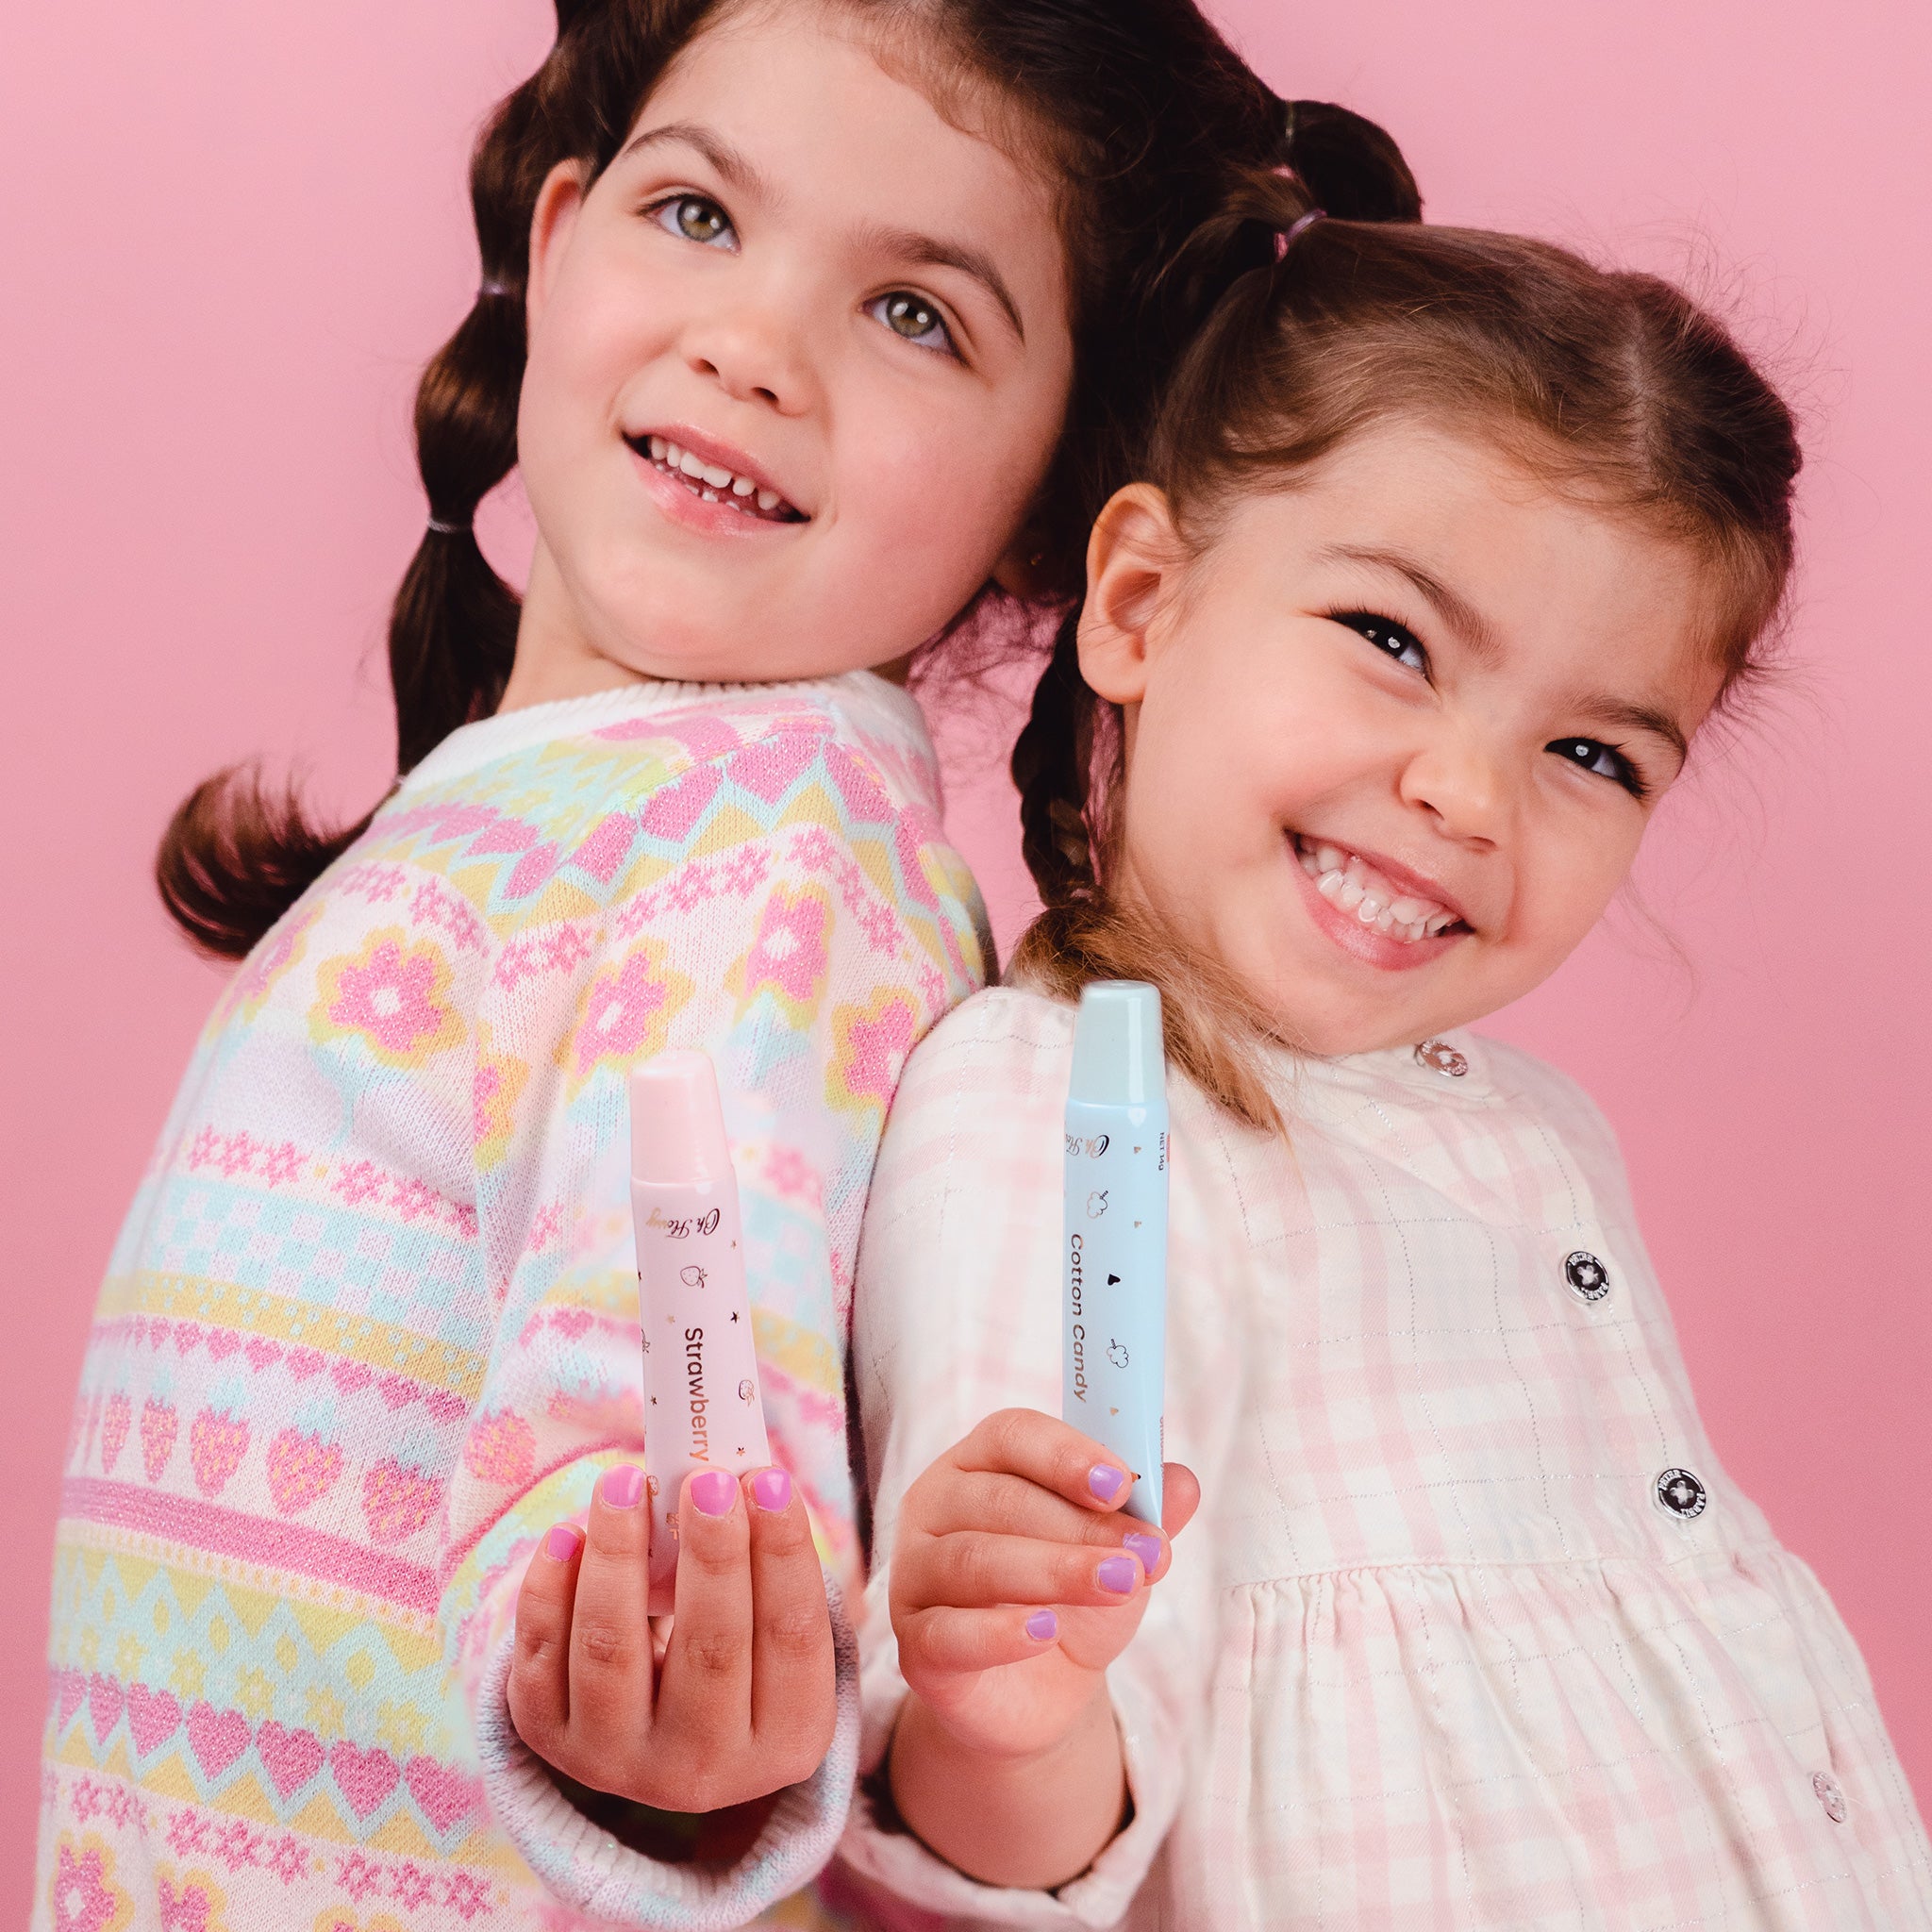 Oh-Flossy-Kids-Natural-Makeup-Lip-gloss-duo-on-hands